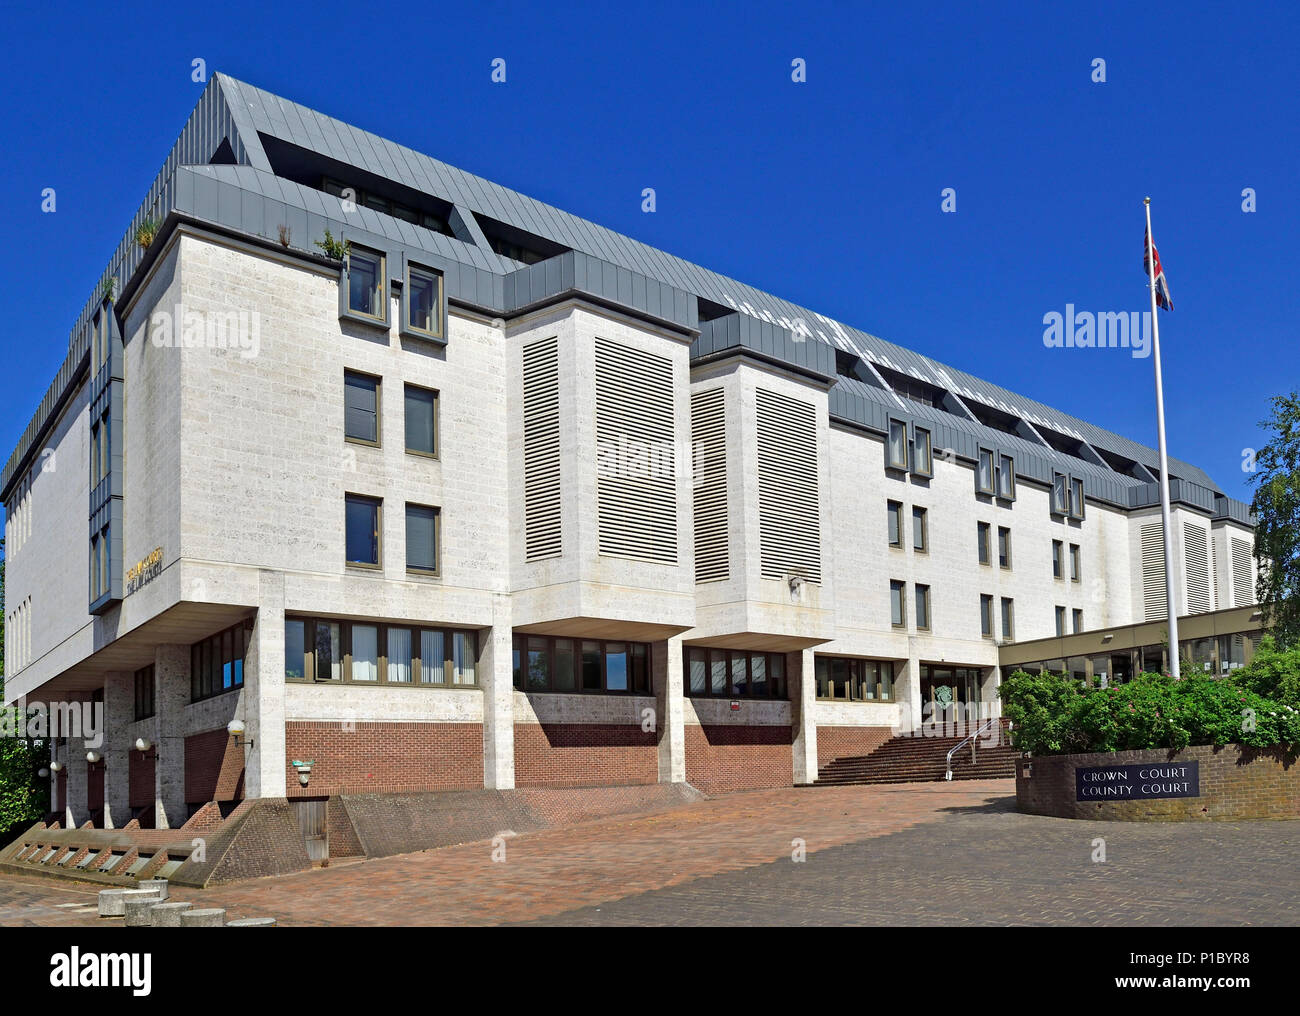 Maidstone Combined Court Centre (Crown and County courts) Barker Road, Maidstone, Kent, England, UK. Stock Photo